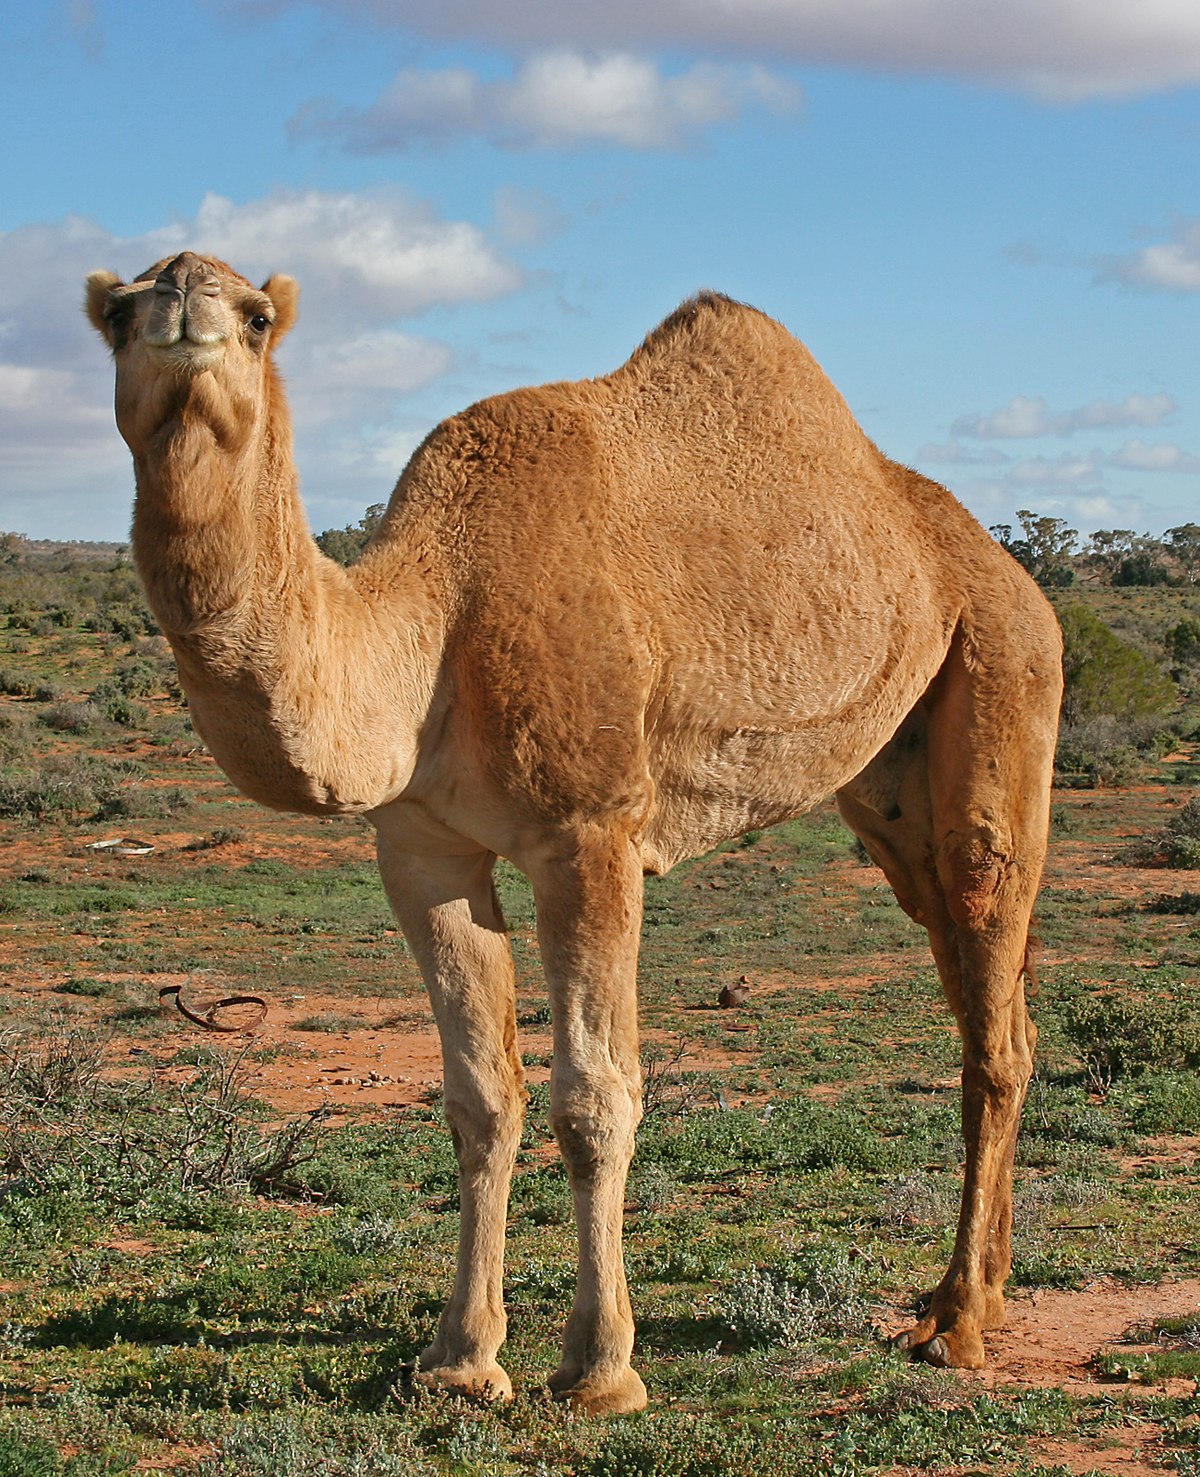 During the lockdown, a circus family buys camels to generate ‘white gold’ milk for £20 per litre